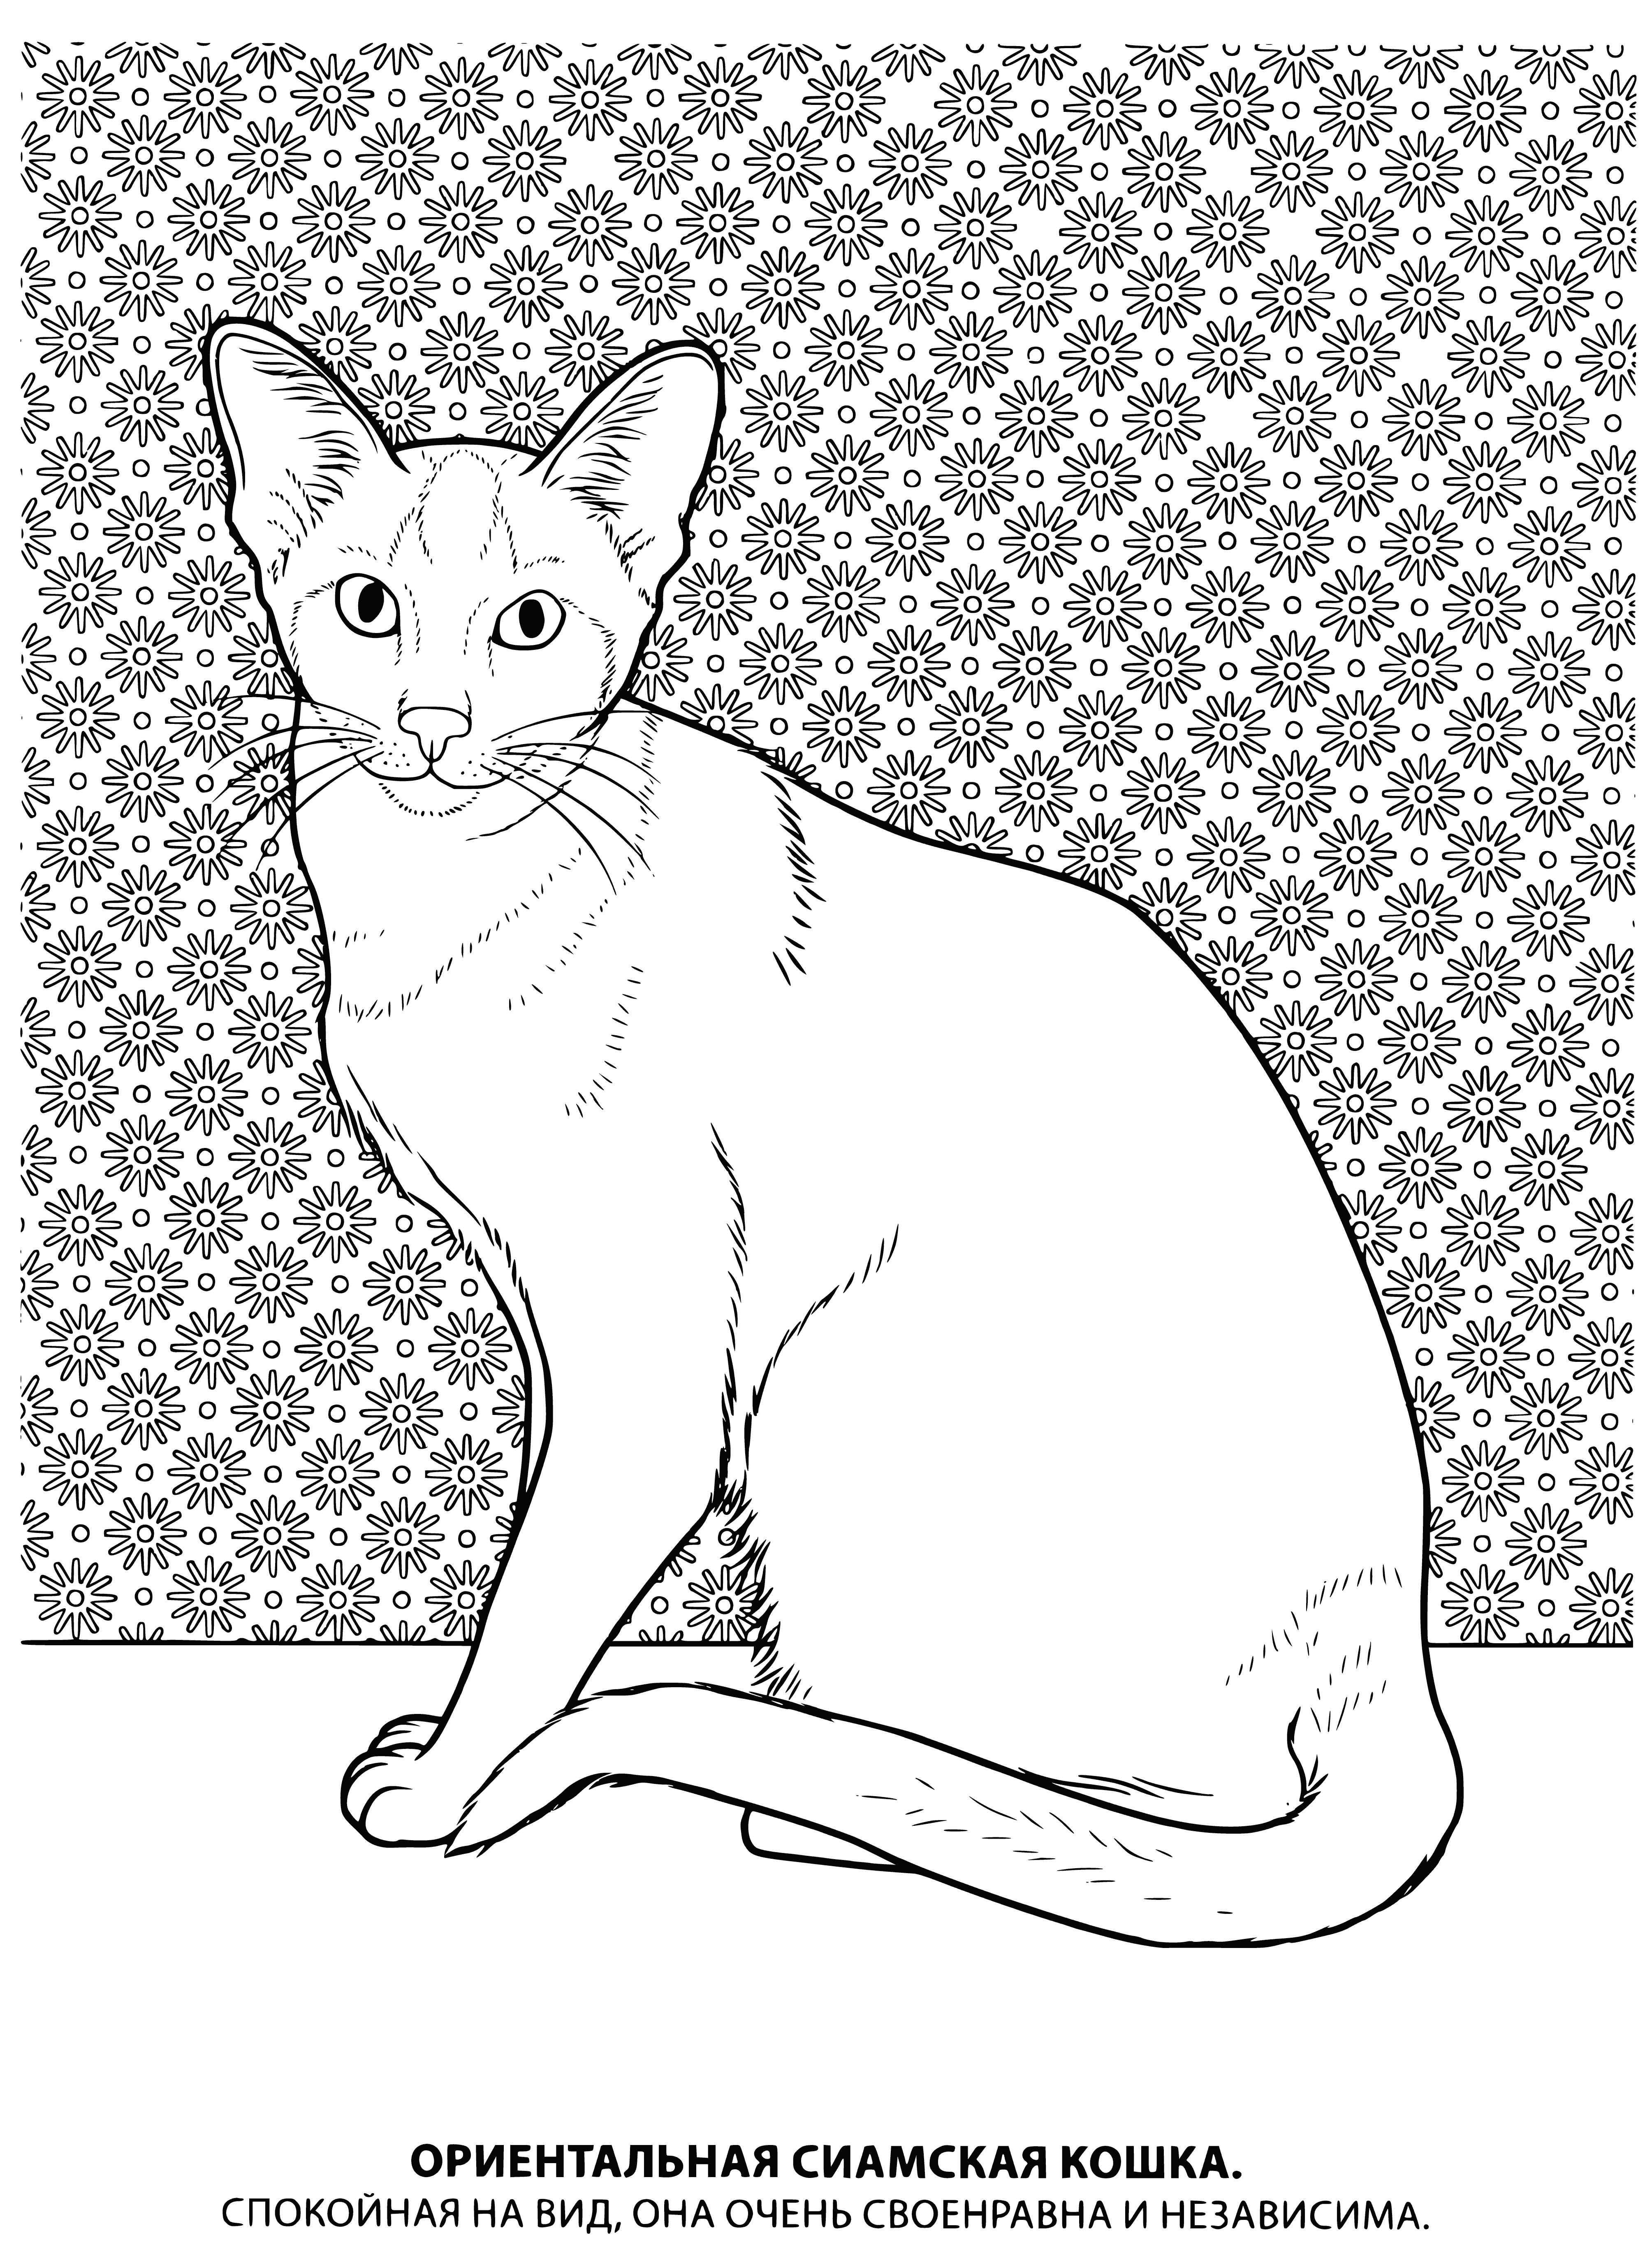 coloring page: Coloring page of siamese cat w/ short, dense fur & cream-colored body w/ dark points on face, ears, legs & tail.